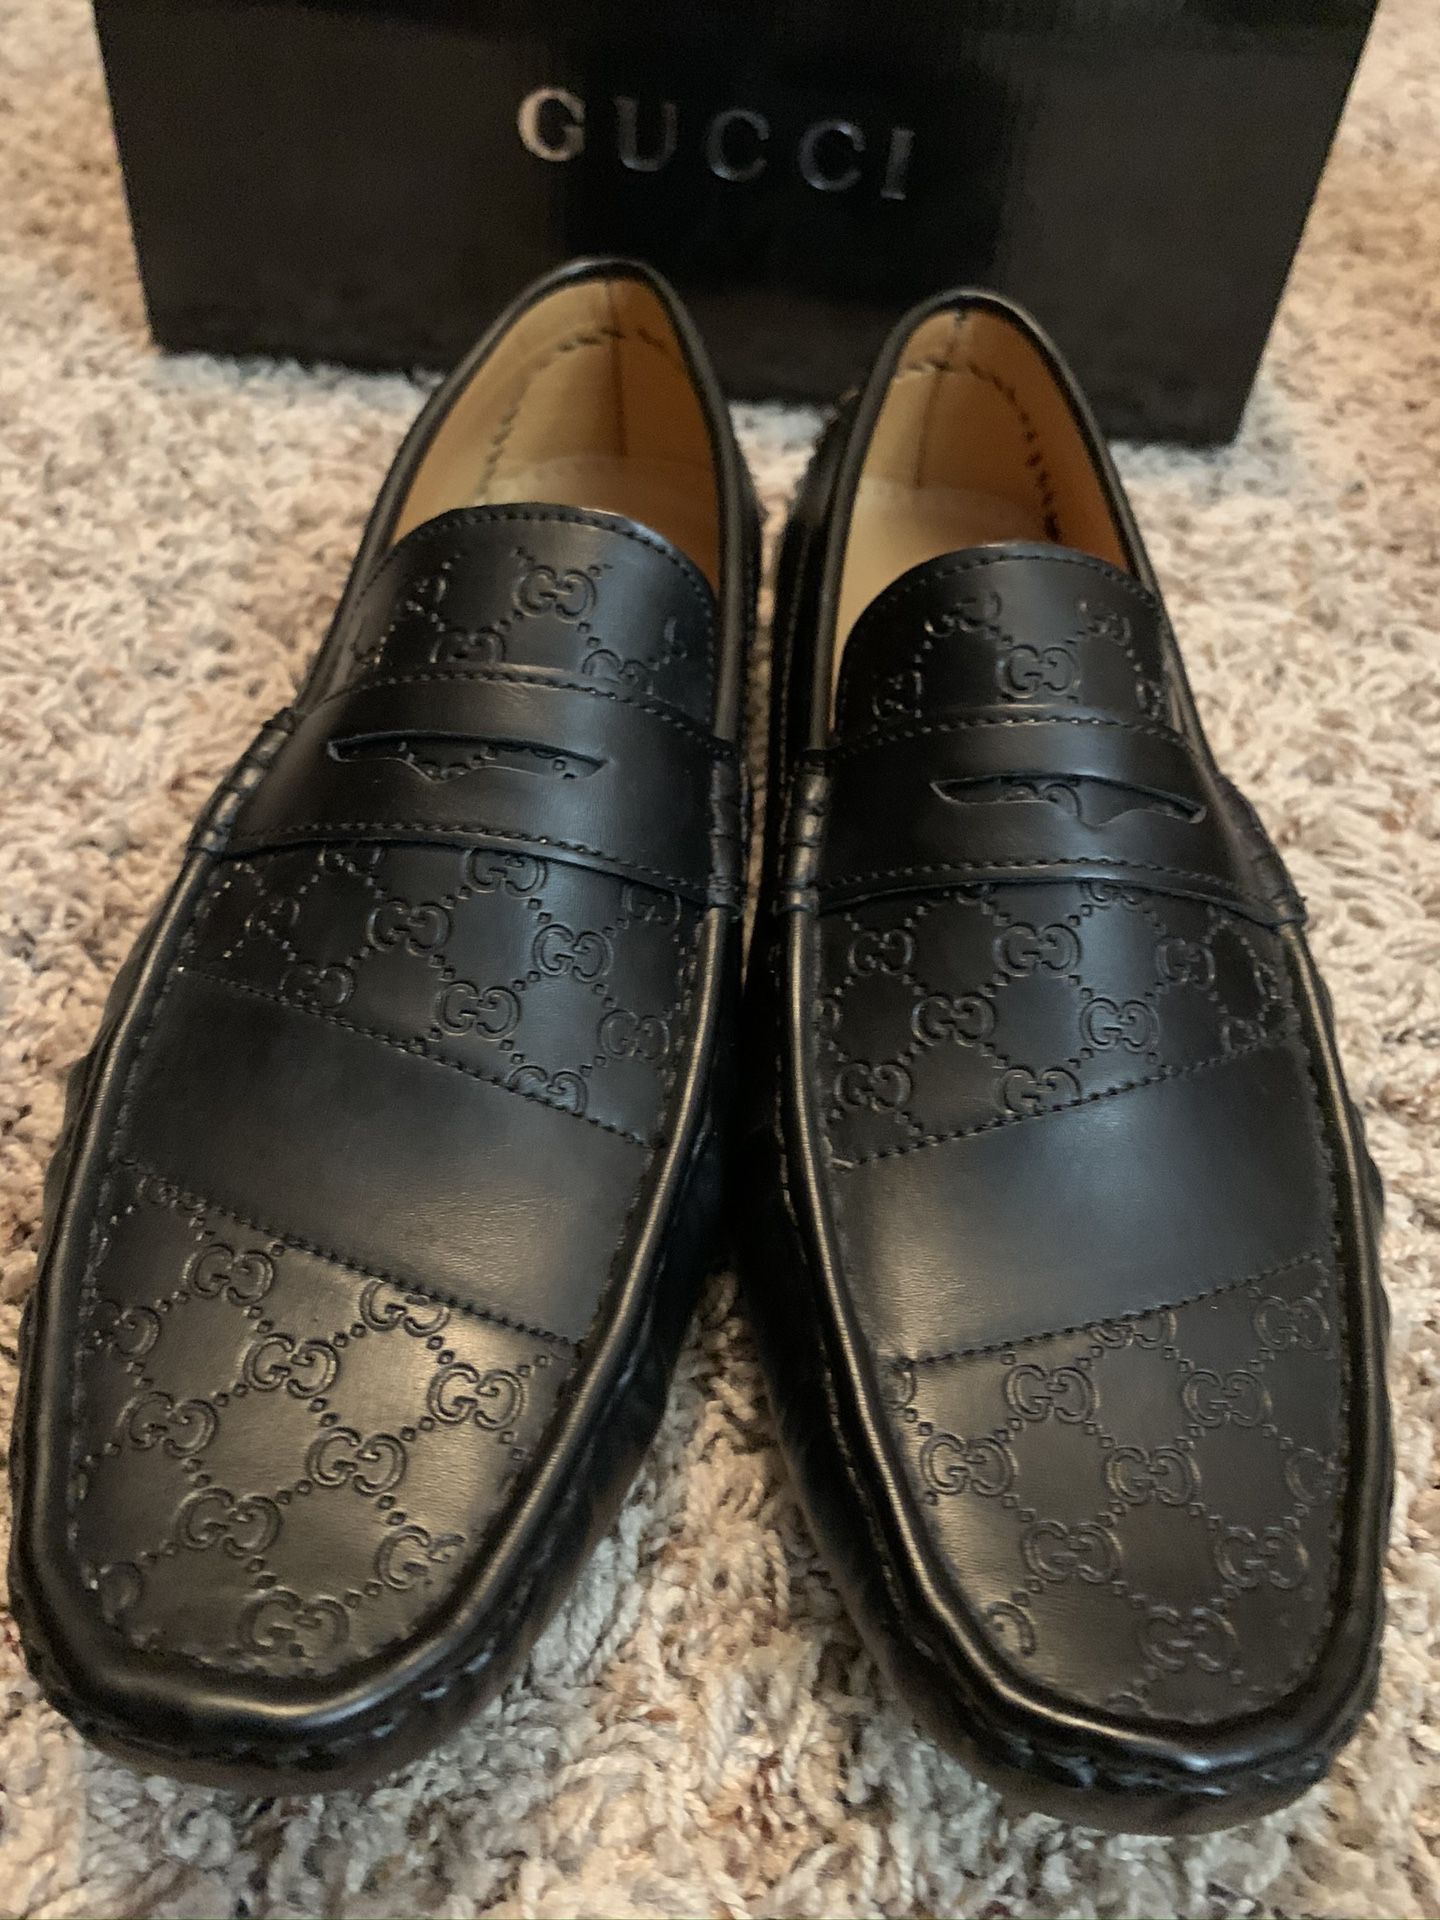 Men’s Gucci driving loafers